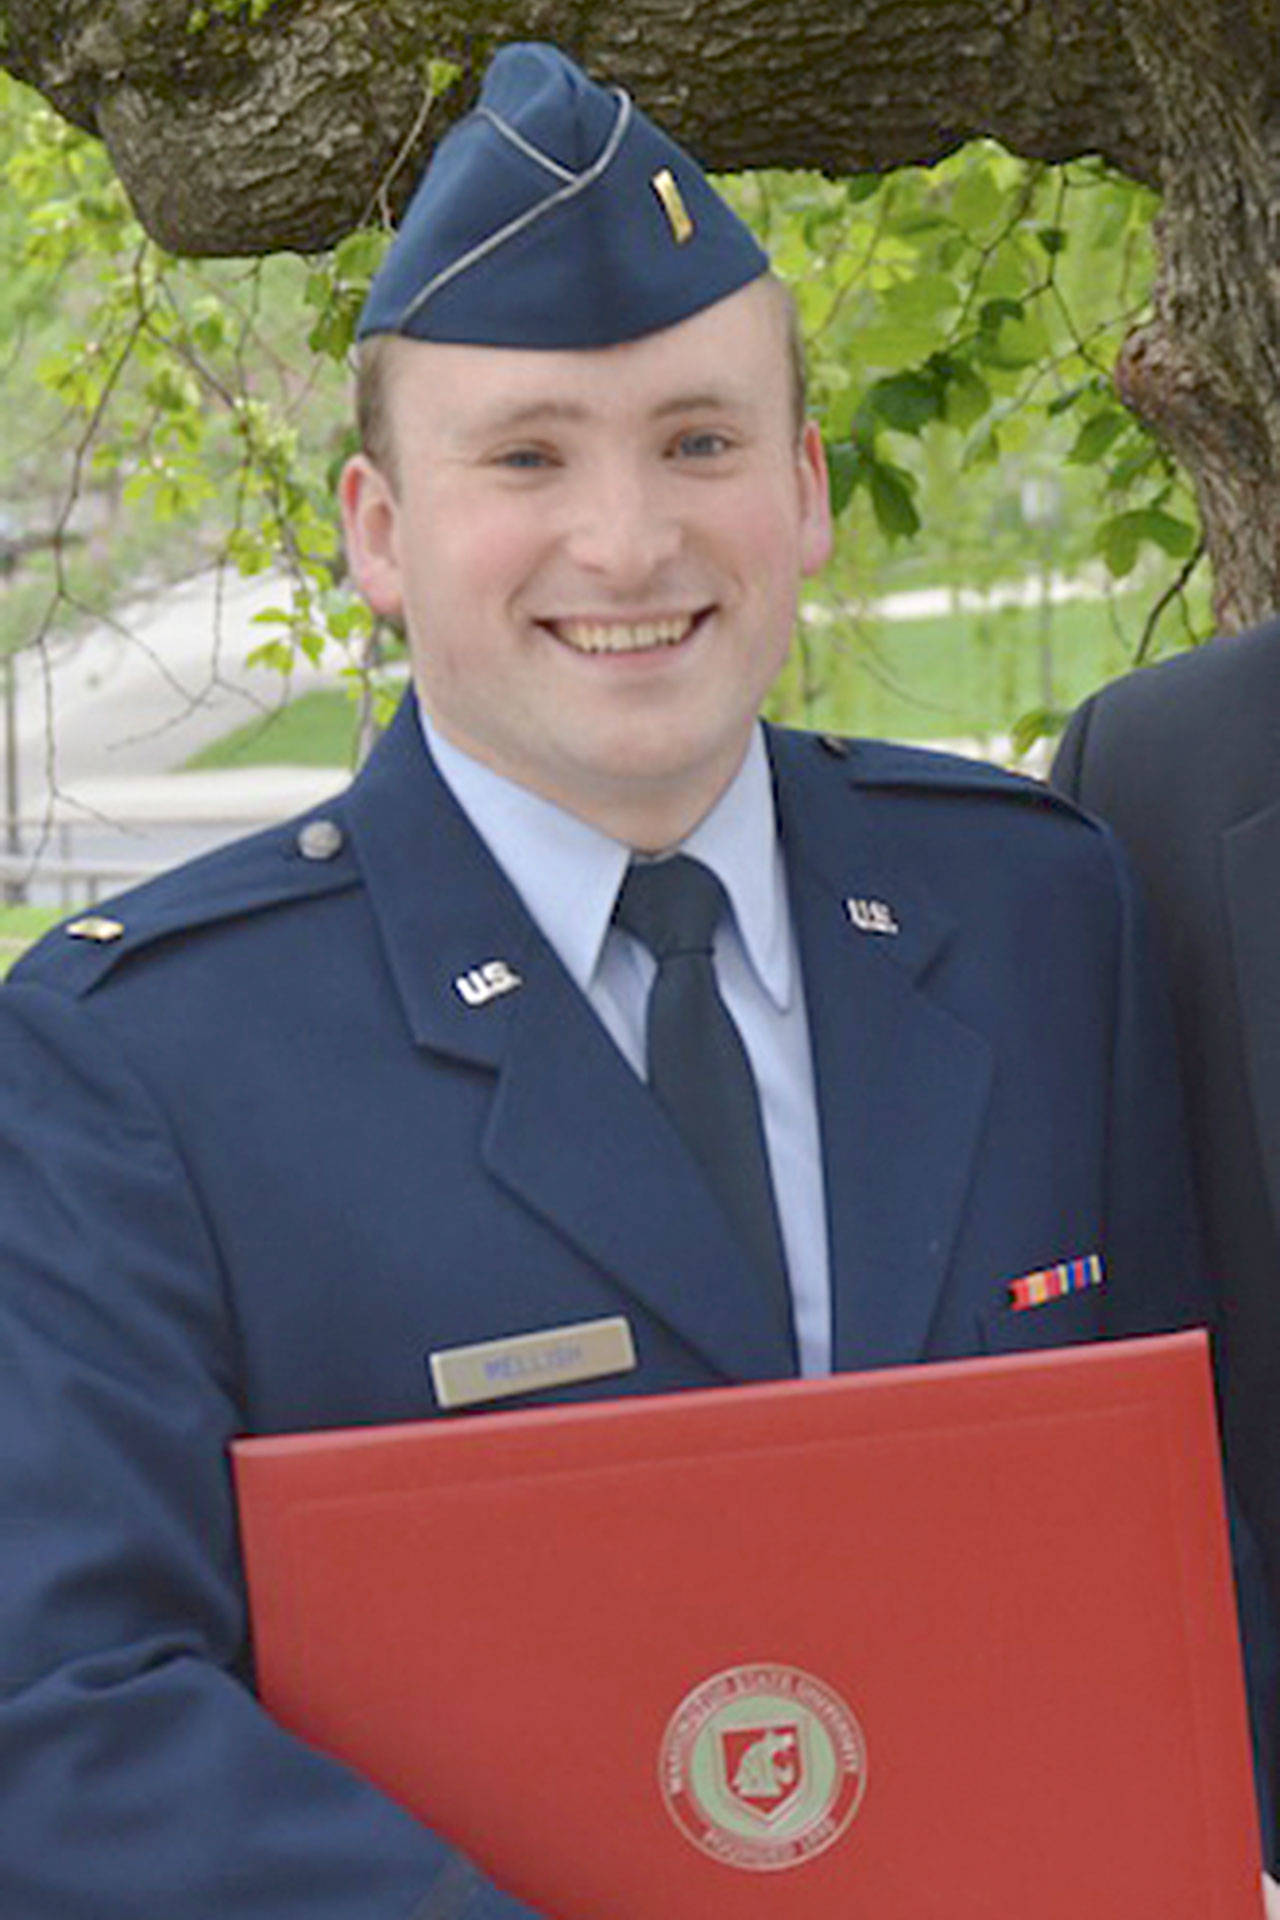 Contributed photo Robert “Will” Mellish was recently commissioned as second lieutenant in the Air Force.